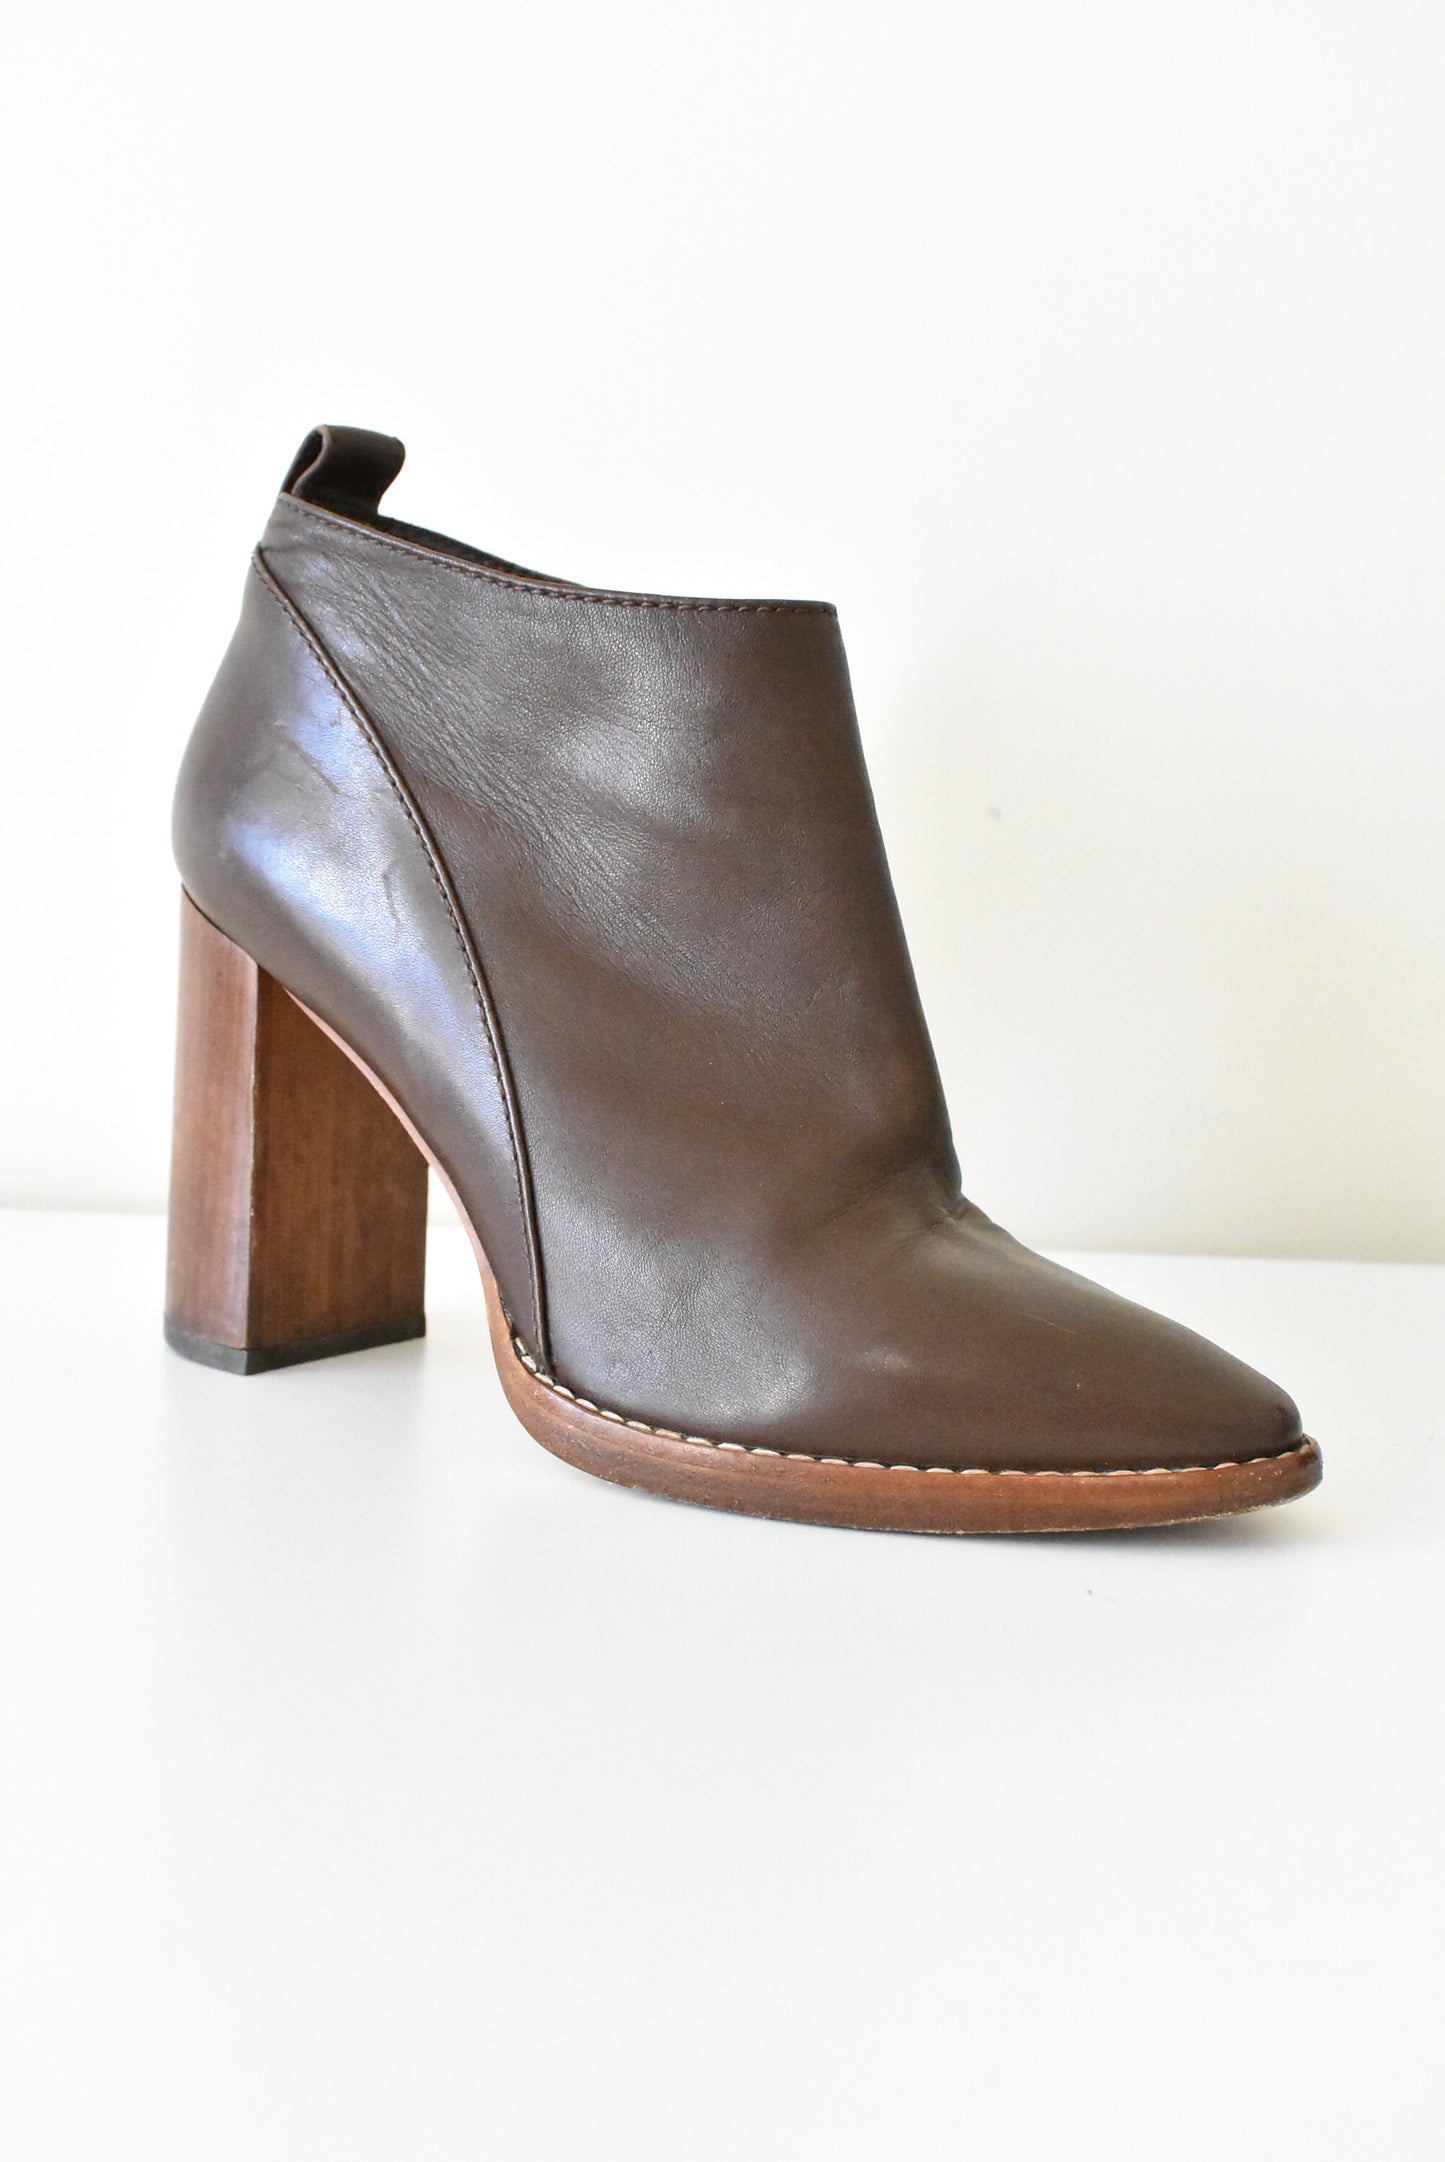 MaxMara Italy chocolate leather ankle boots, size 38